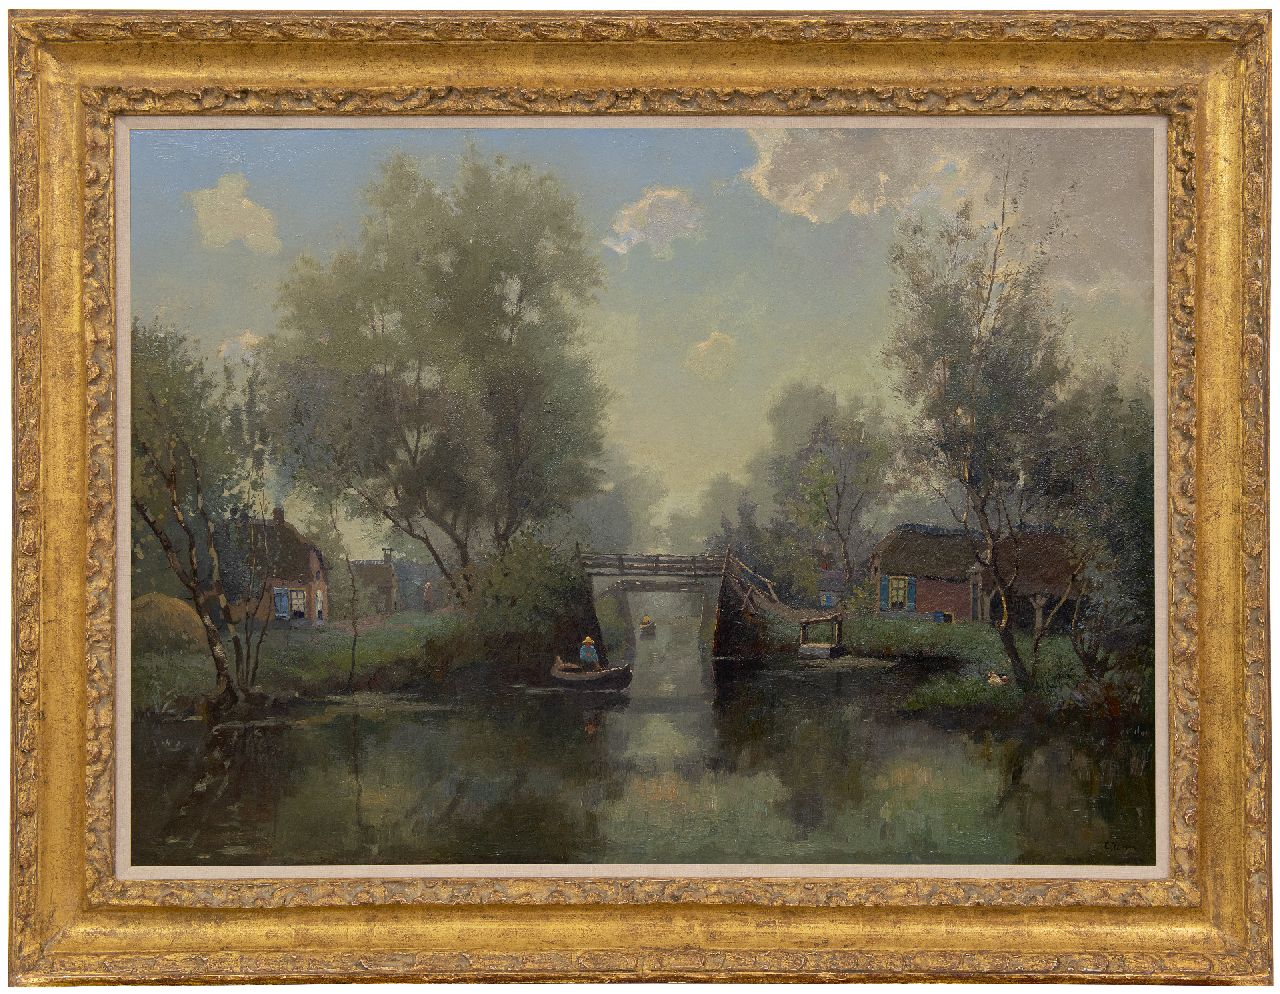 Ydema E.  | Egnatius Ydema | Paintings offered for sale | Canal in Giethoorn, oil on canvas 68.2 x 94.8 cm, signed l.r.